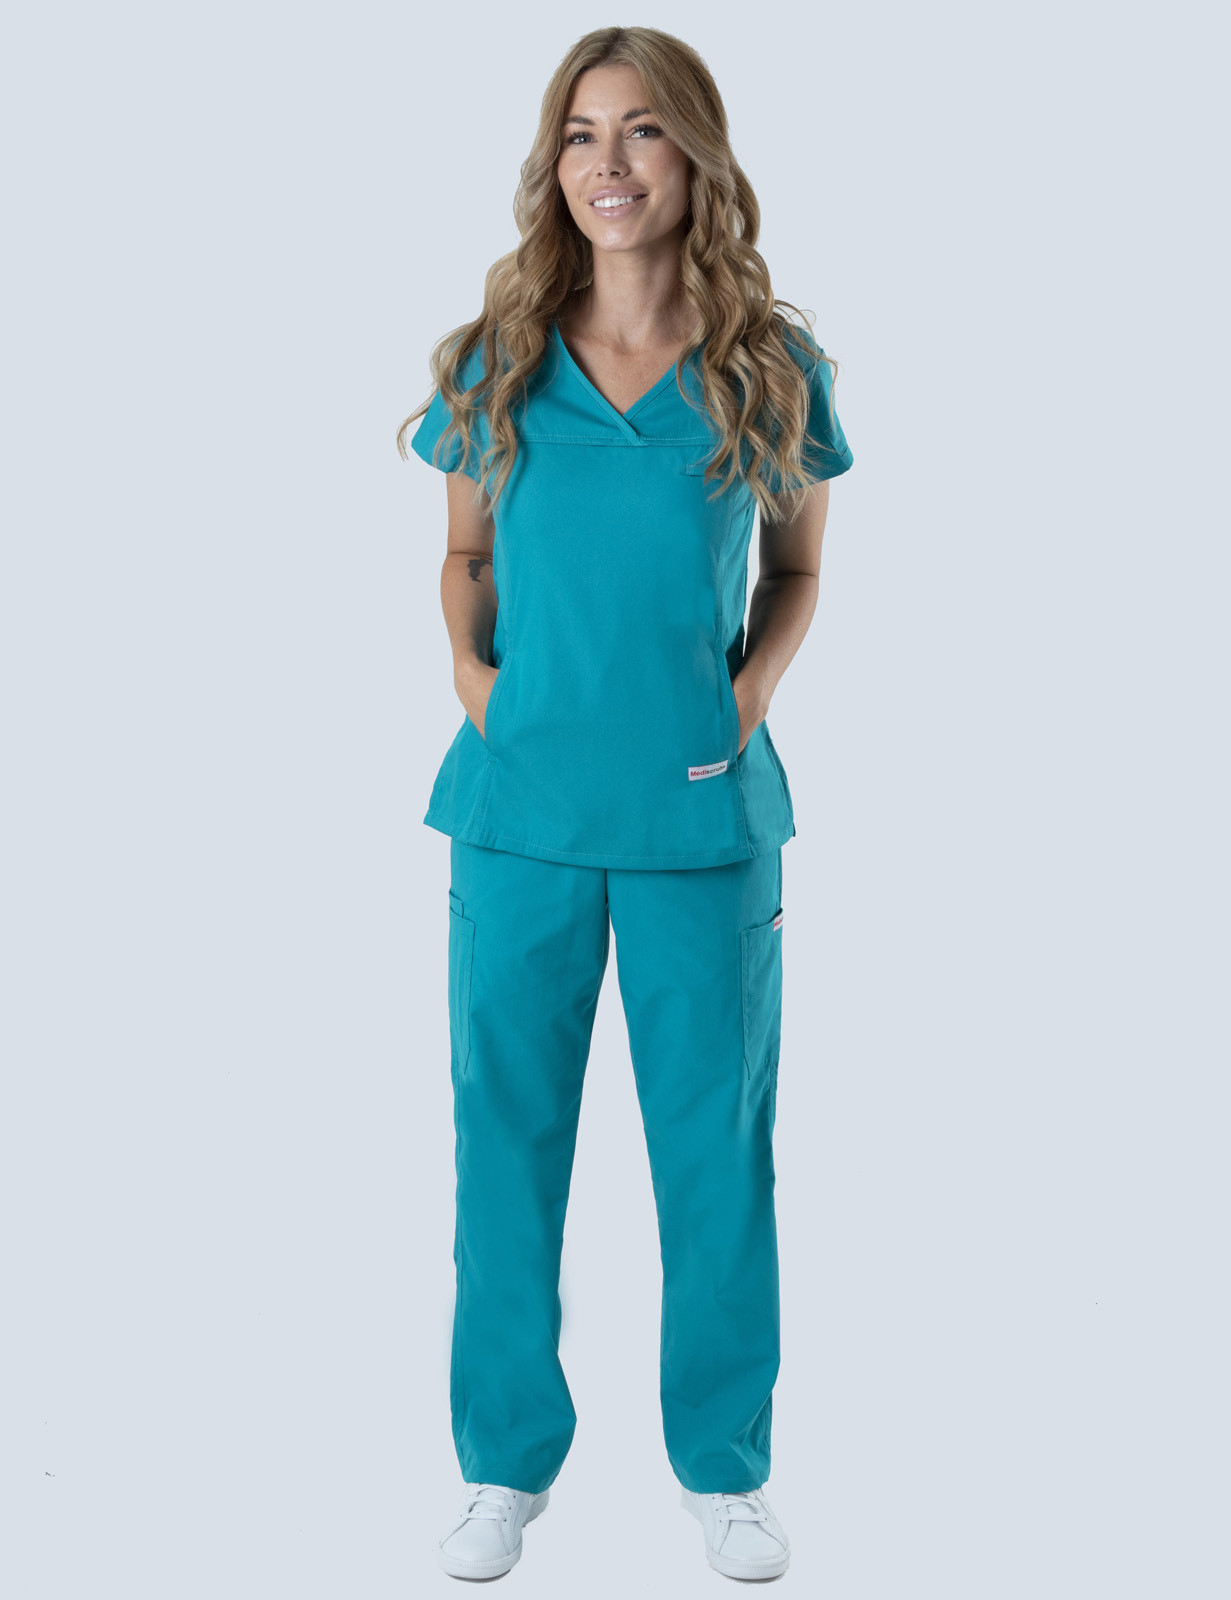 Sydney Children's Hospital Randwick (Women's Fit Solid Scrub Top and Cargo Pants in Teal incl Logos)